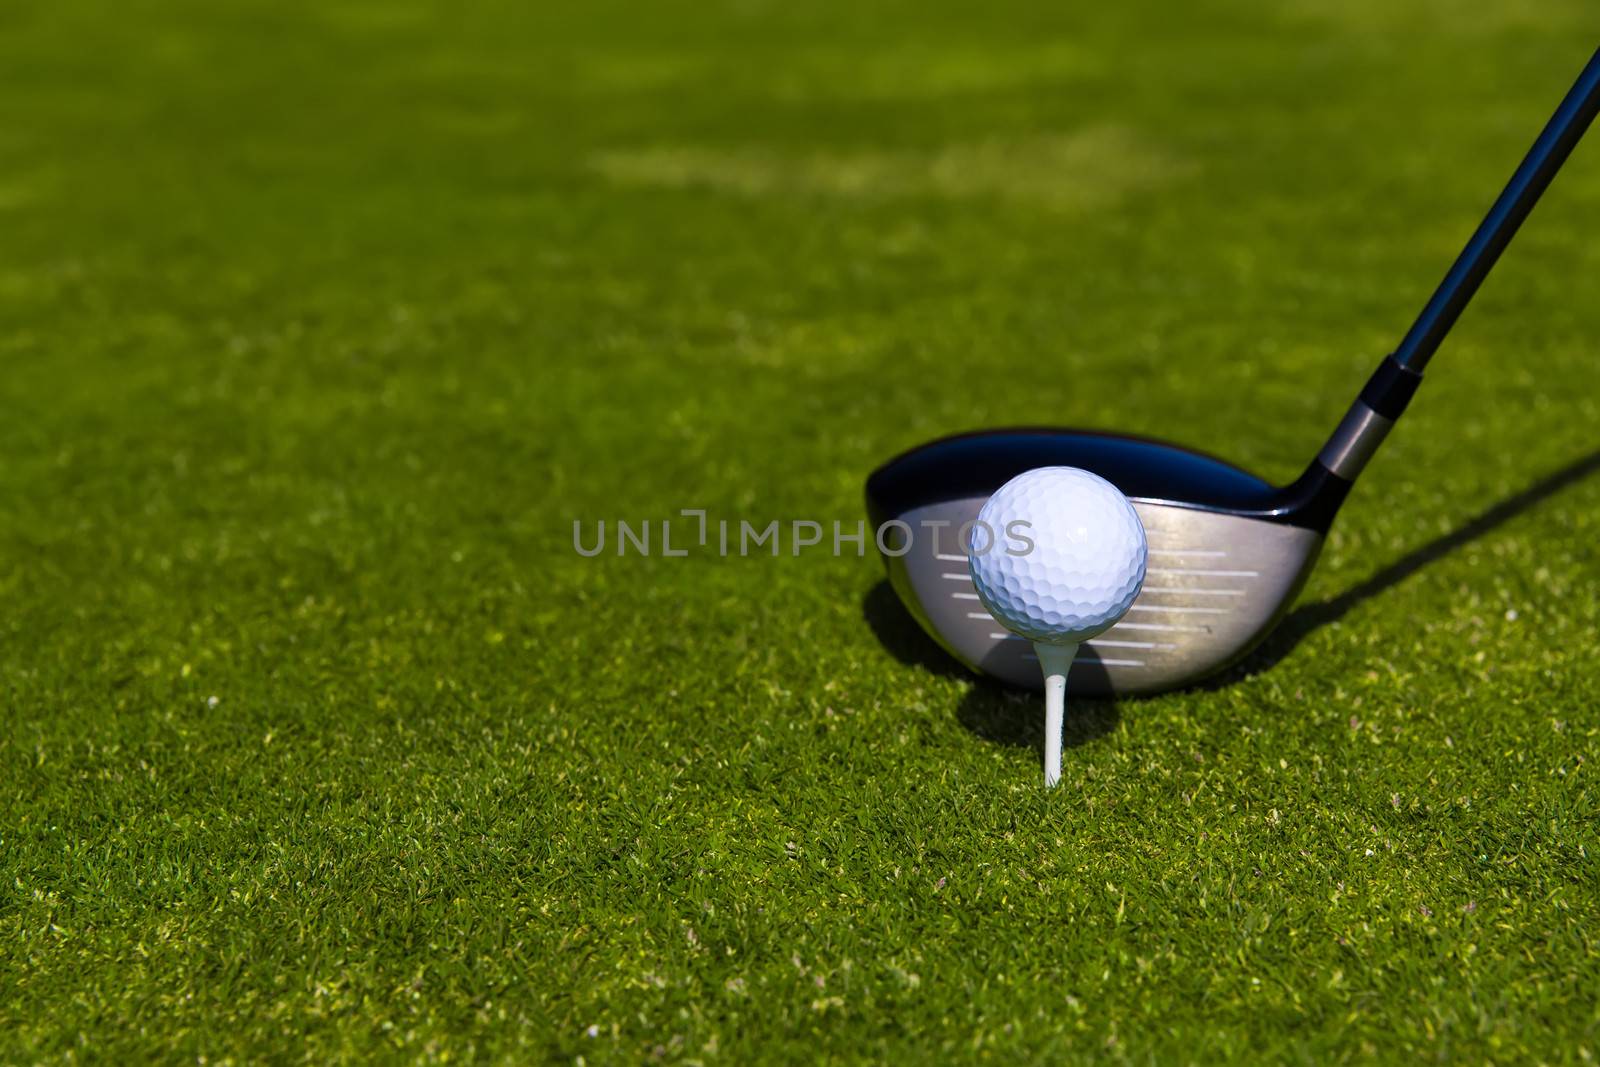 Close up of a golf ball on a tee with a club behind waiting to hit it.